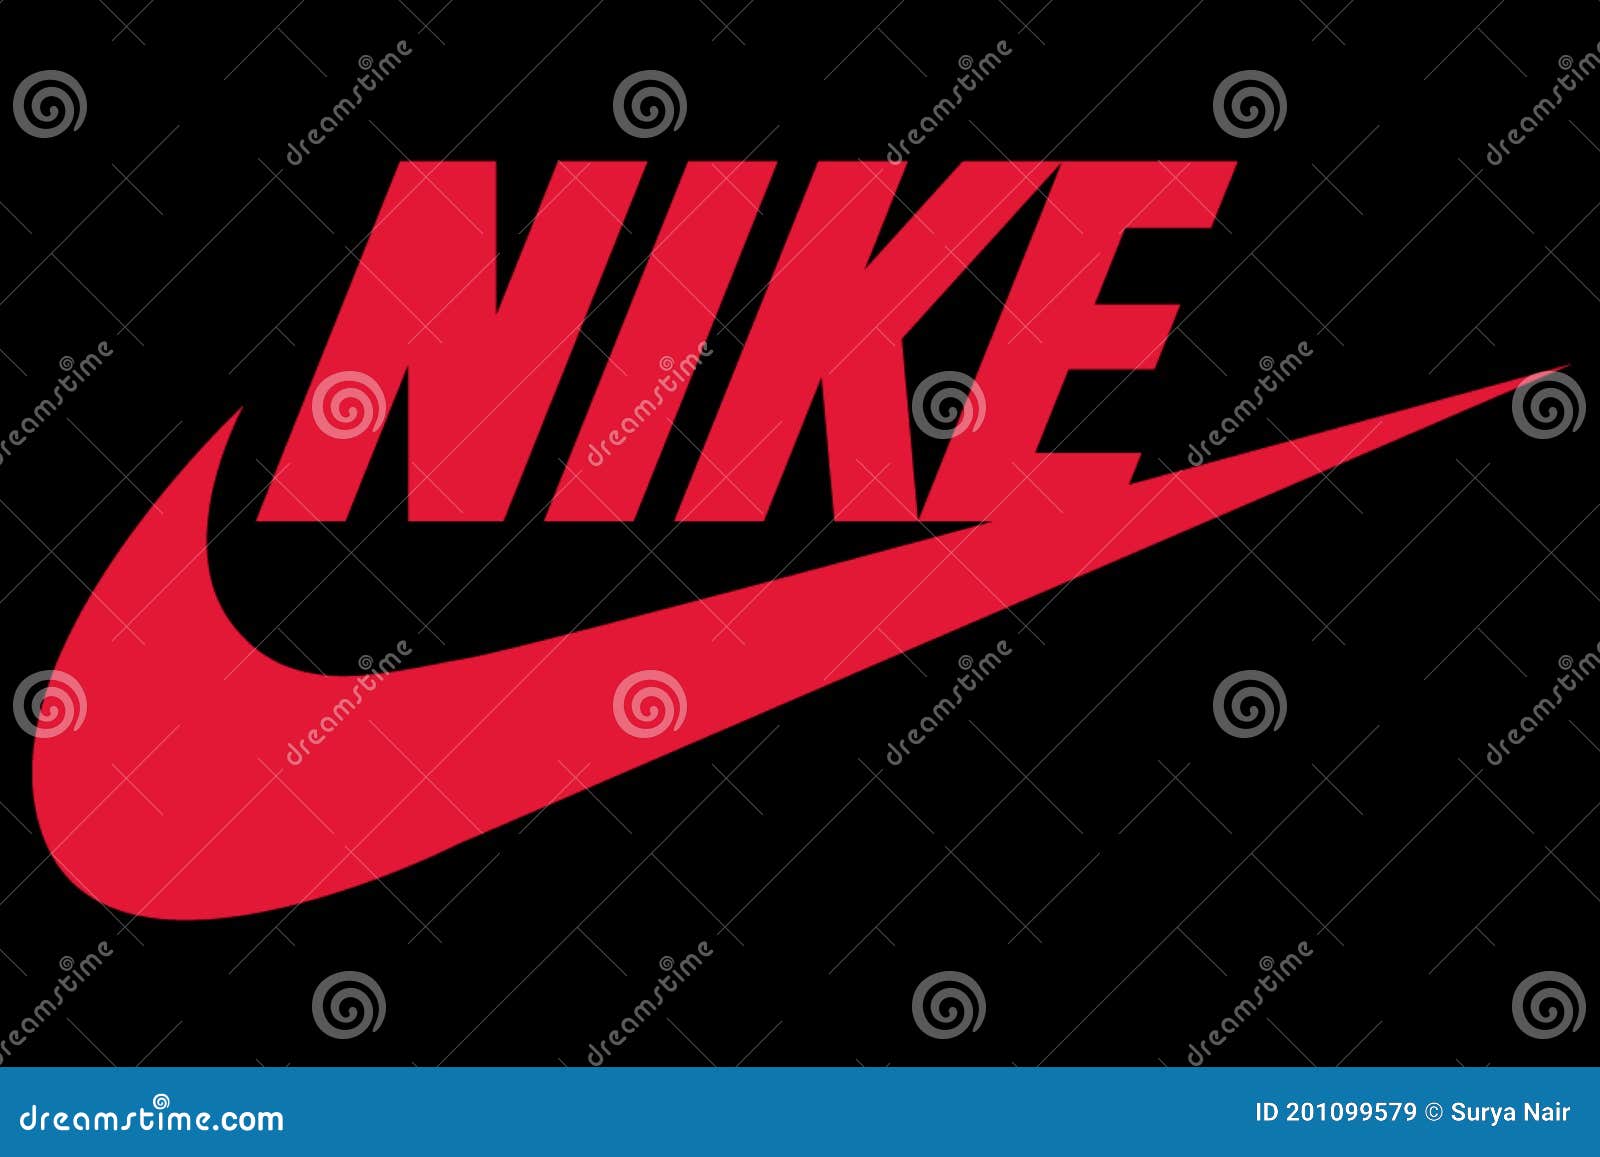 Nike Logo on Black Paper. Nike, Inc Editorial Stock Image of commercial, gear: 201099579